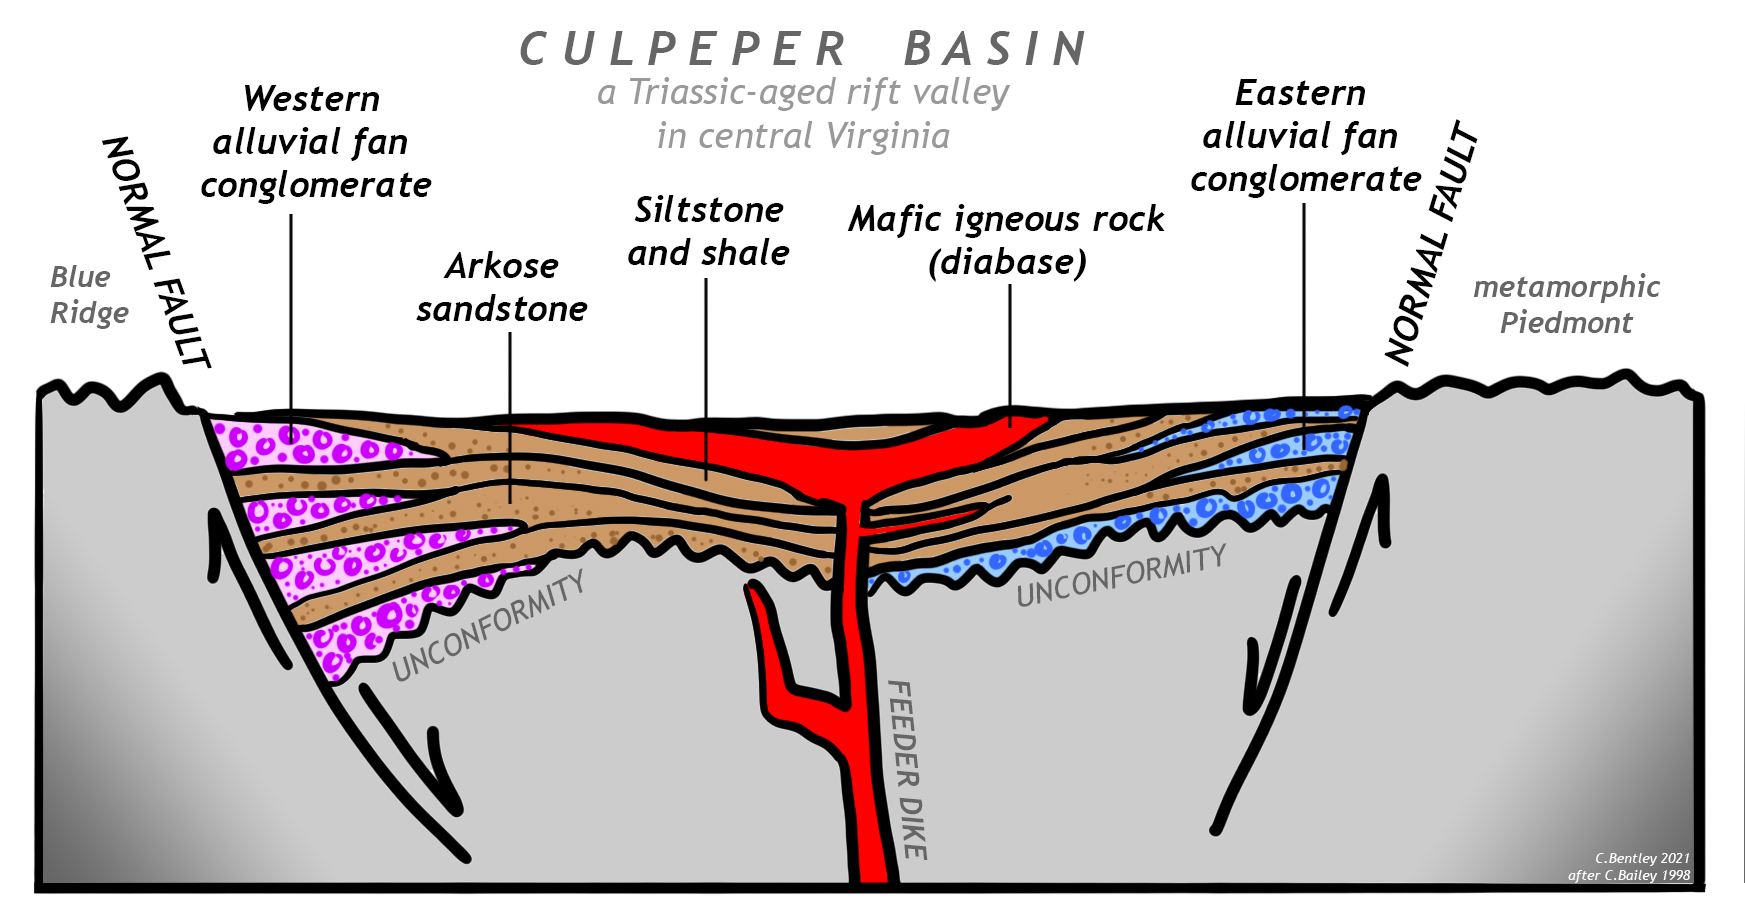 Cartoon cross-section of the Culpeper Basin, a Triassic-aged rift valley in central Virginia. The cross-section shows the valley flanked by two normal faults: it is a central down-dropped "graben." At the bottom of all the sedimentary rocks filling the rift basin is an unconformity. West of the western fault is the Blue Ridge. East of the eastern fault is the metamorphic Piedmont. The rift basin is coarsest at the edges, with wedge-shaped deposits of alluvial fan conglomerate reaching out into the basin. The composition of the eastern conglomerate is different from the composition of the western conglomerate. Arkose sandstone flanks the conglomerate, but in the middle of the basin is the finest sediment: shale and siltstone. Cutting through all of these clastic sediments is a prominent central mafic igneous intrusion. A feeder dike reaches up and intrudes sills parallel to sedimentary layering. It is labeled "Mafic igneous rock (diabase)")